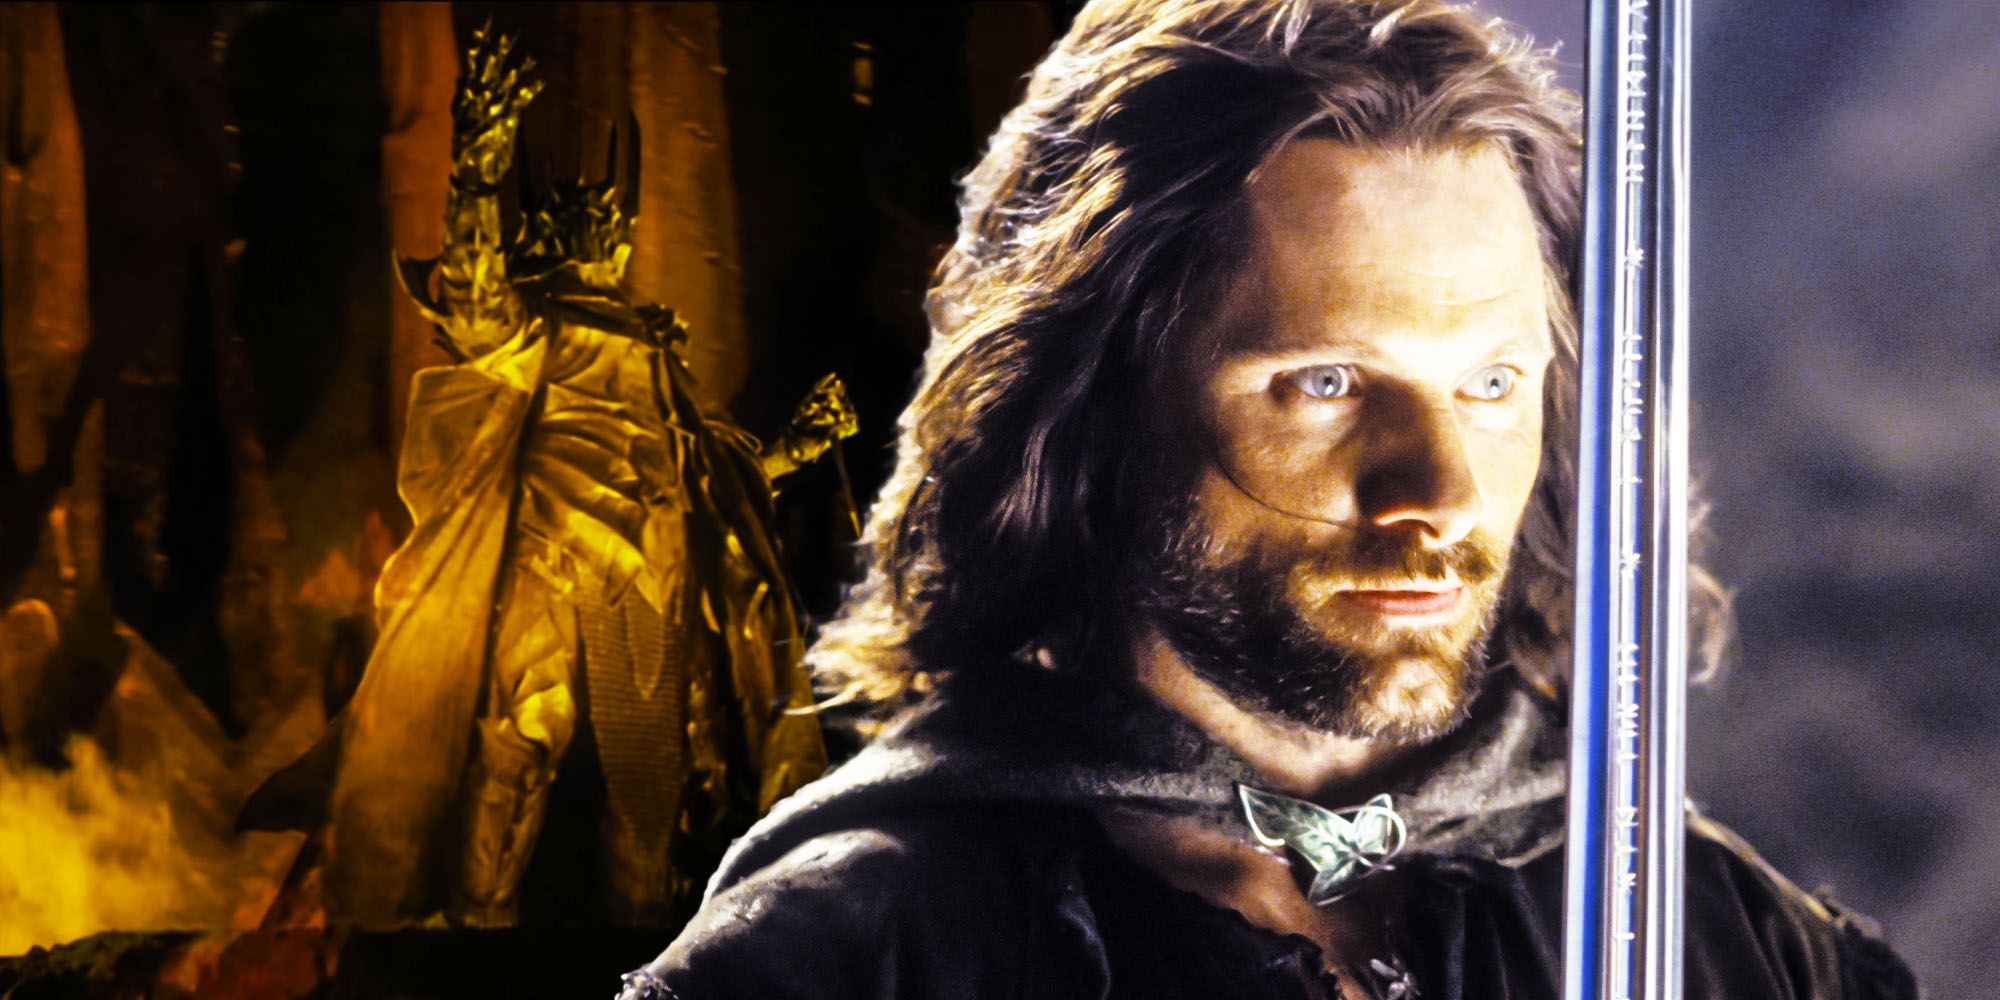 Lord of the rings return of the king deleted scene aragorn vs sauron